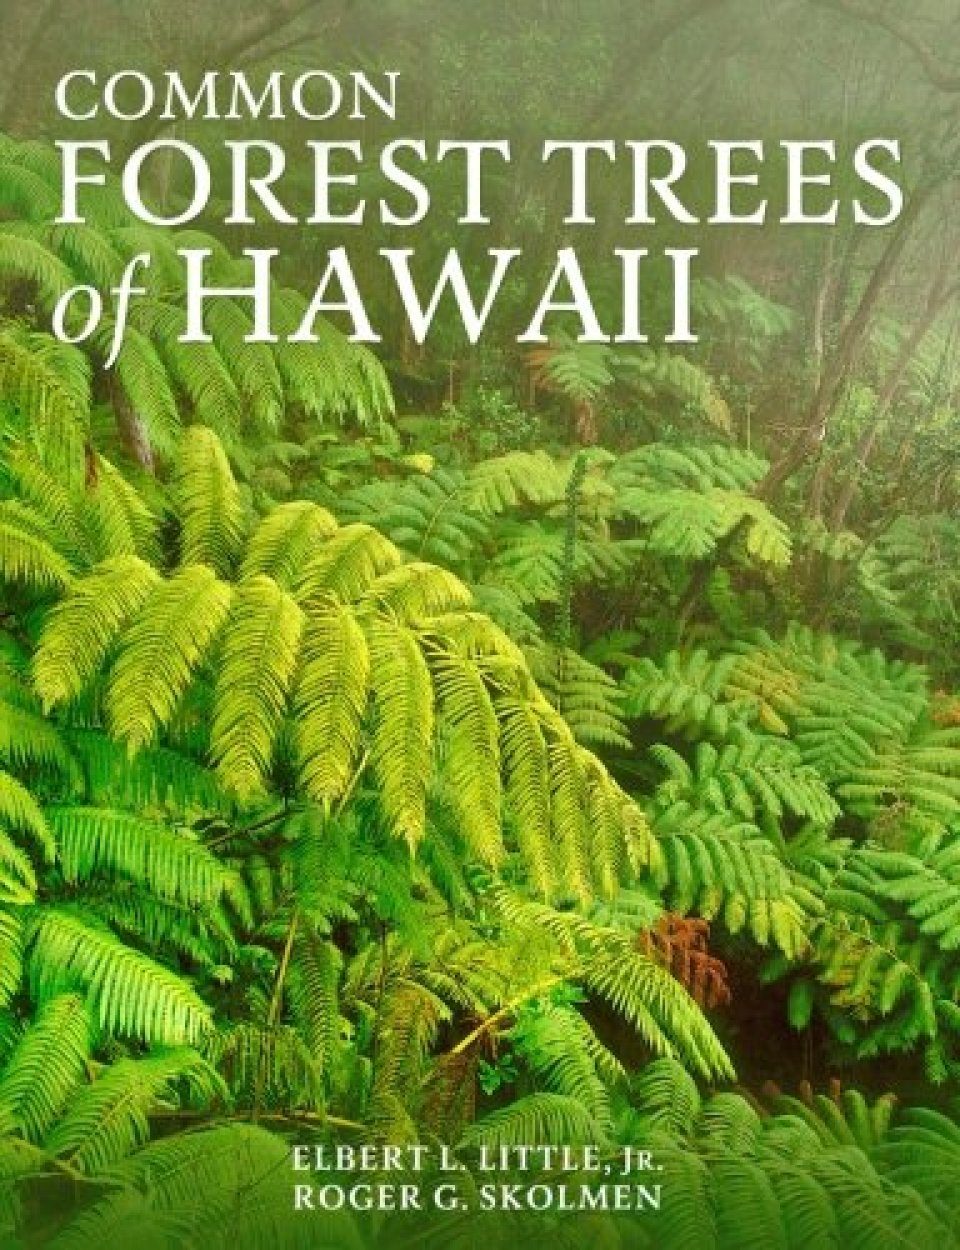 Common Forest Trees of Hawaii: Native and Introduced | NHBS Field ...